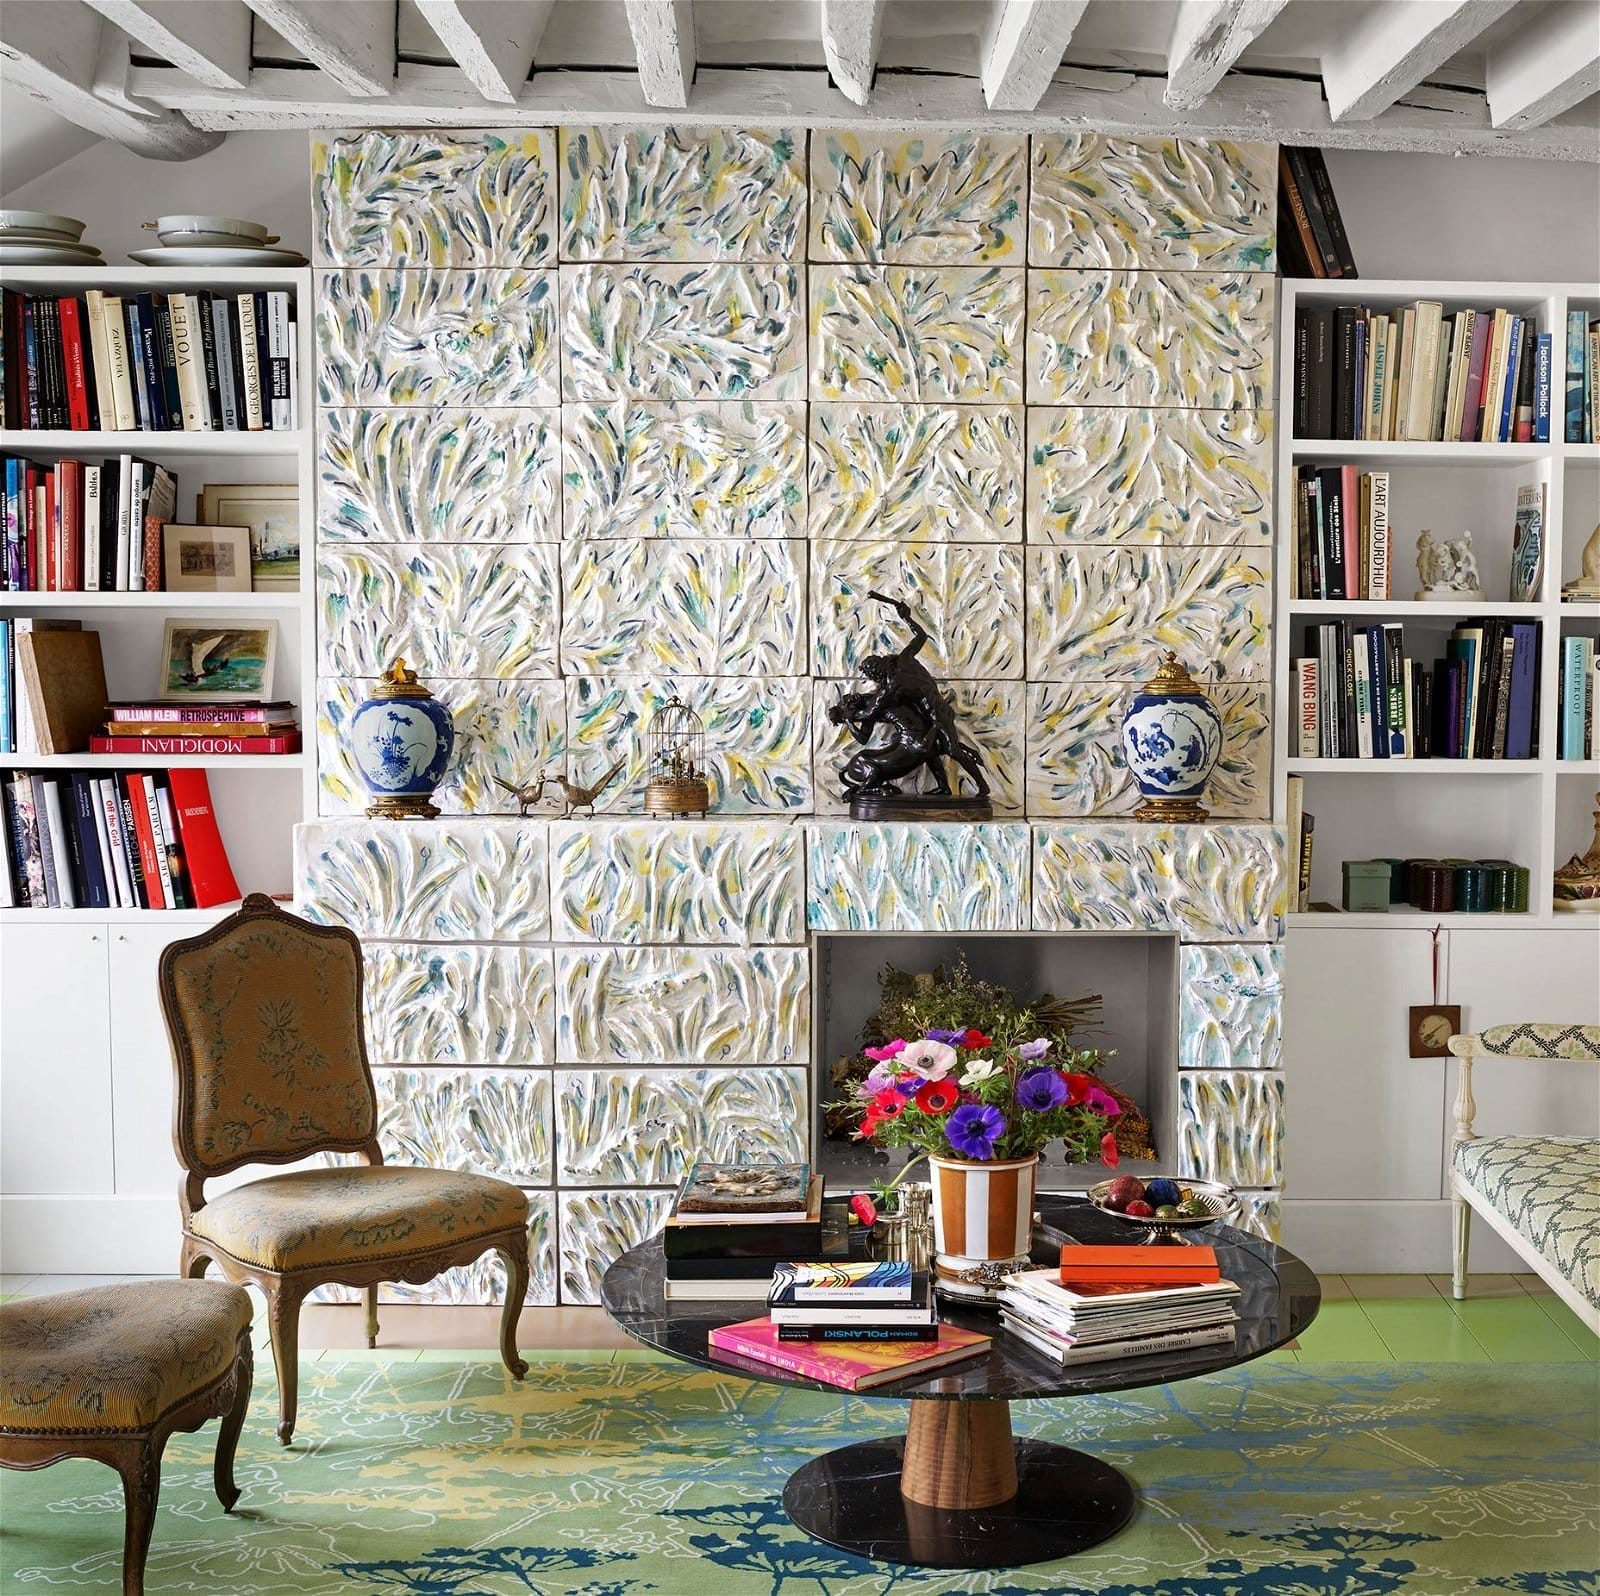 With Pattern and Whimsy Galore, This Parisian Pad Is Like a Painting Come to Life